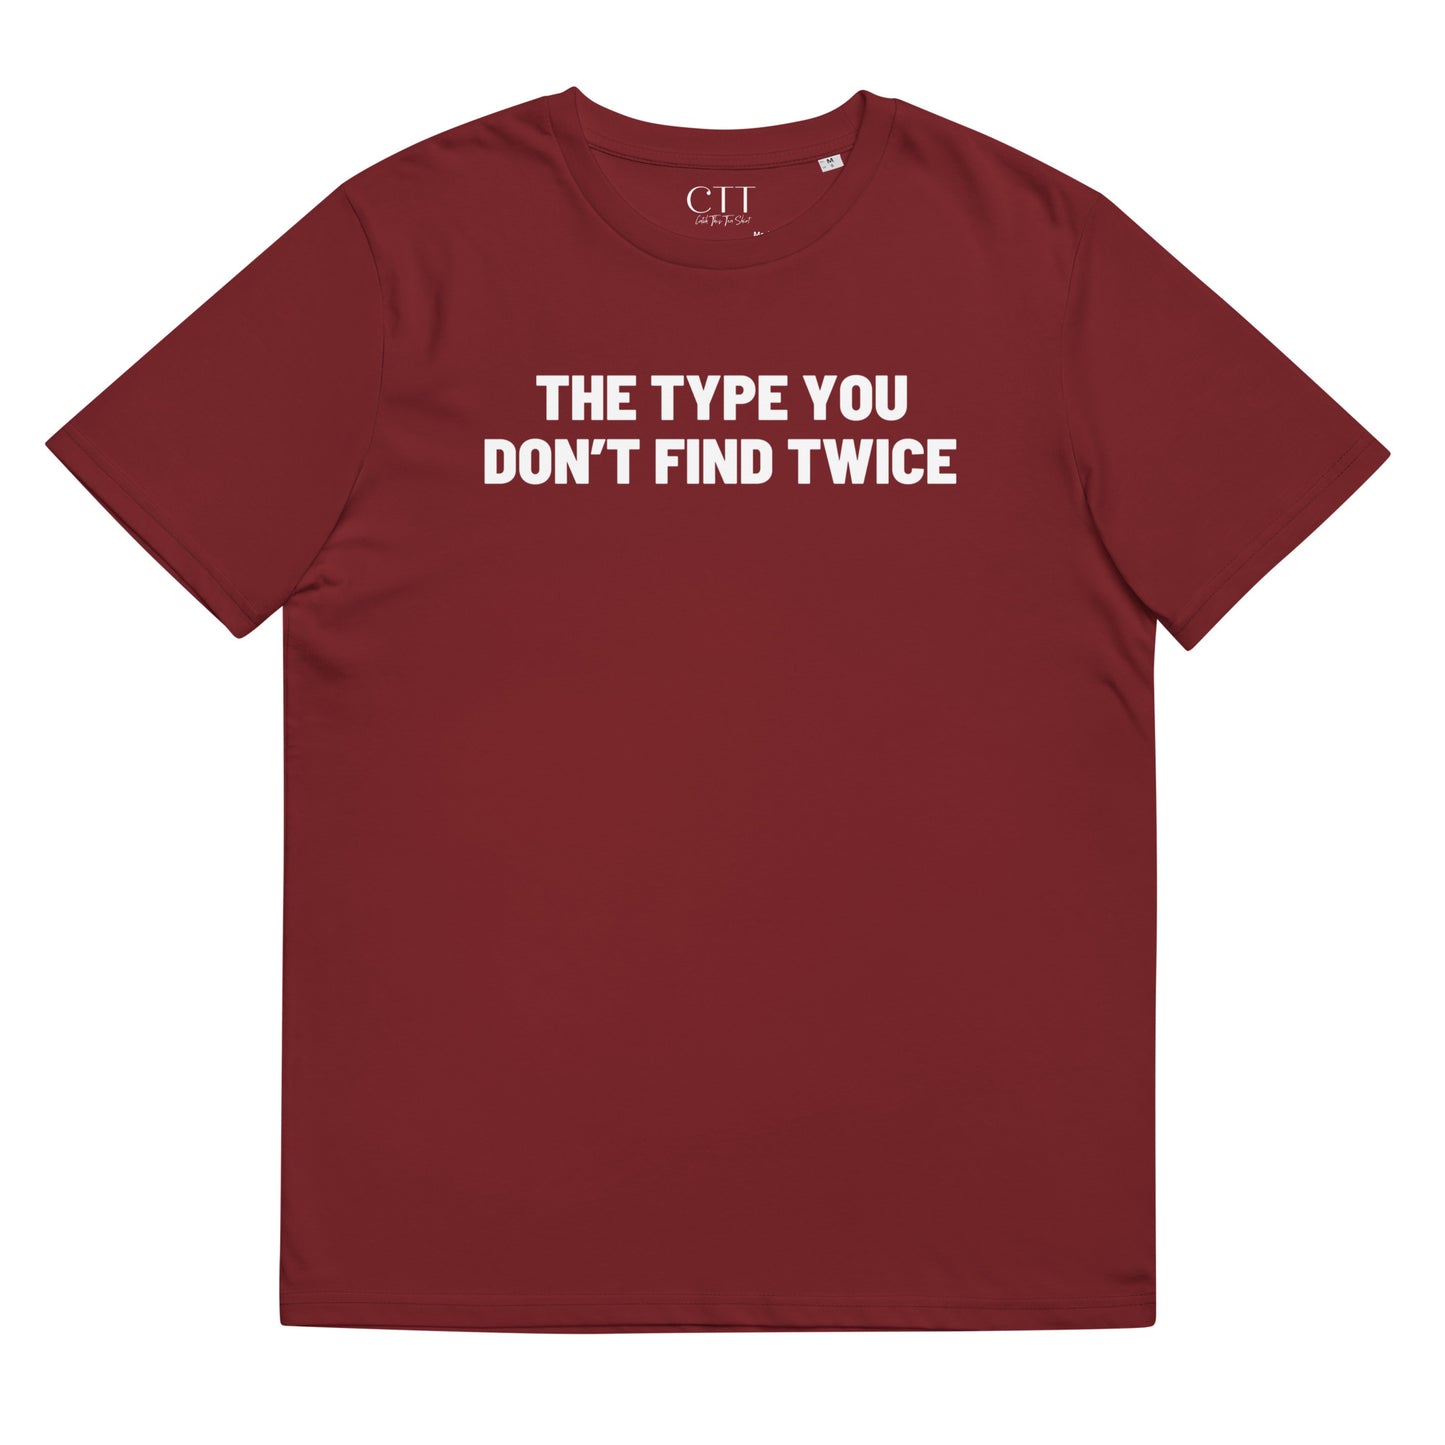 The Type You Don't Find Twice | Premium Soft Organic Cotton T-shirt | Unisex